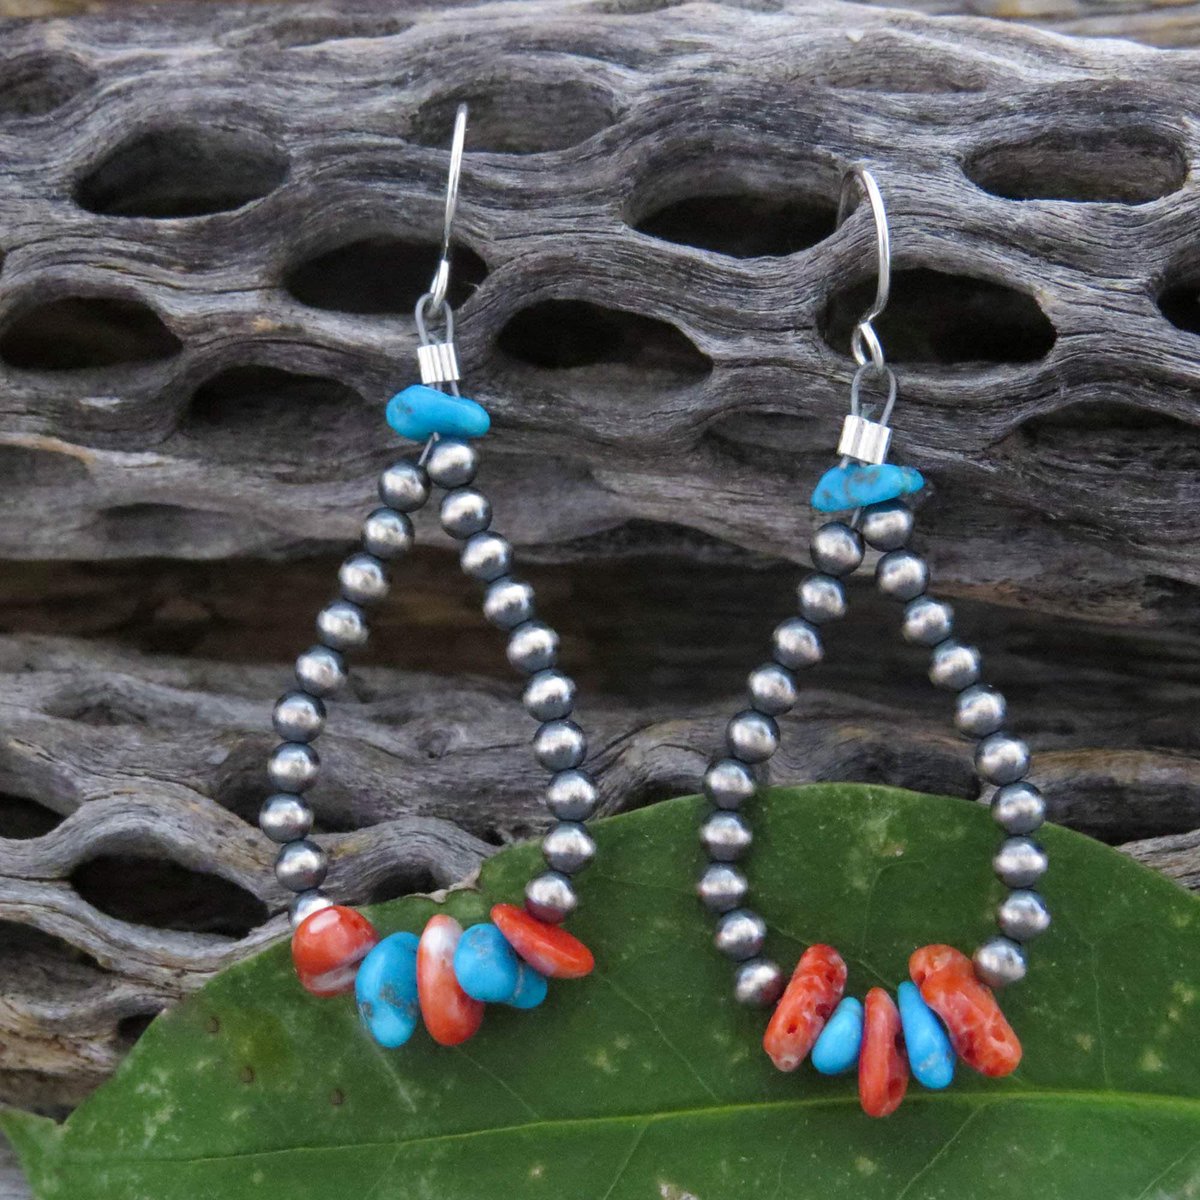 Never miss an opportunity to wear colorful Hoops #etsy  
SHOP HERE: etsy.me/40AXl2w    #silver hoops #beadedhoops #navajopearls #colorfulearrings #turquoiseearings #turquoisehoops
#navajojewelry #handmadeearrings